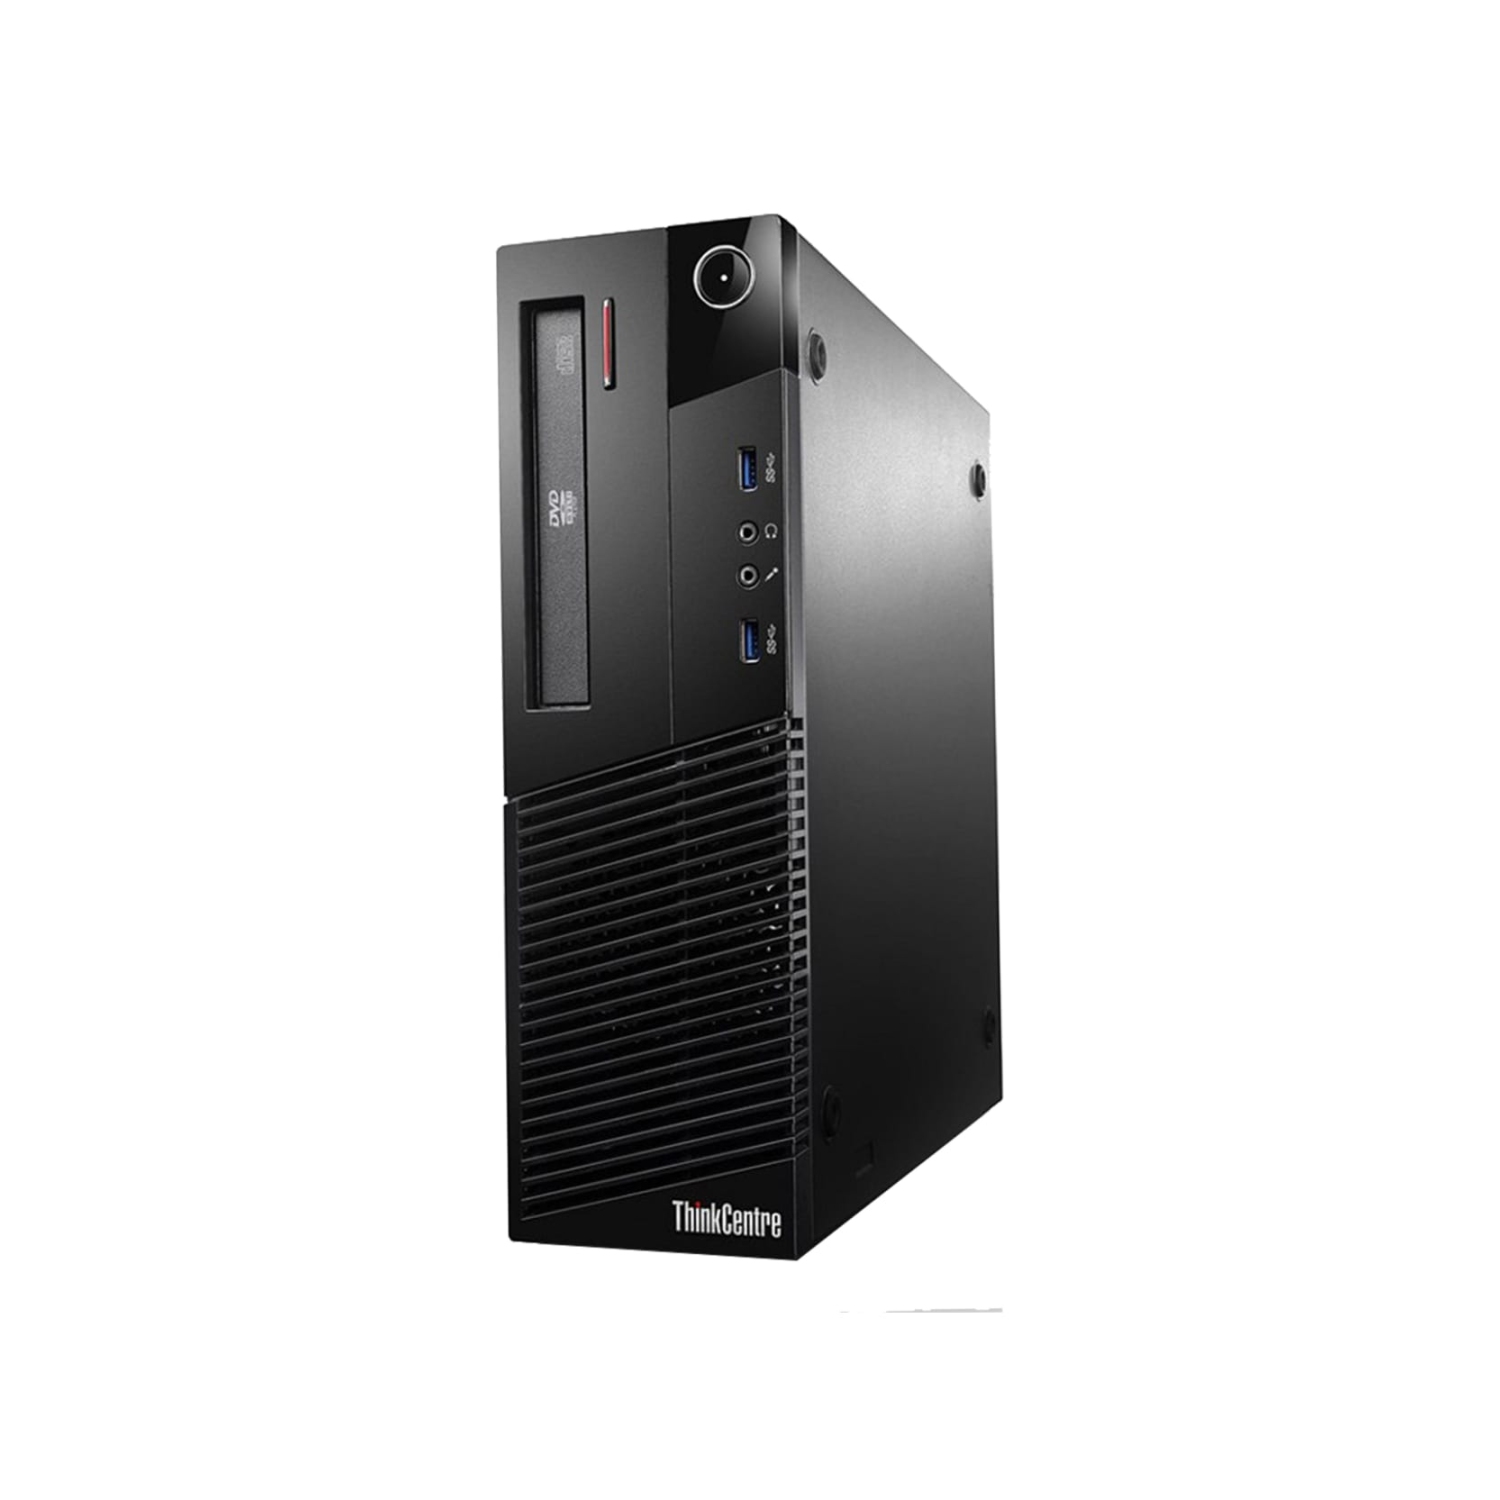 Refurbished (Good) - Lenovo ThinkCentre M93P SFF Desktop, Intel Core i5-4th Gen. 3.2GHz, 8GB RAM, 240GB SSD, Windows 10 Pro. (Keyboard & Mouse not Included)